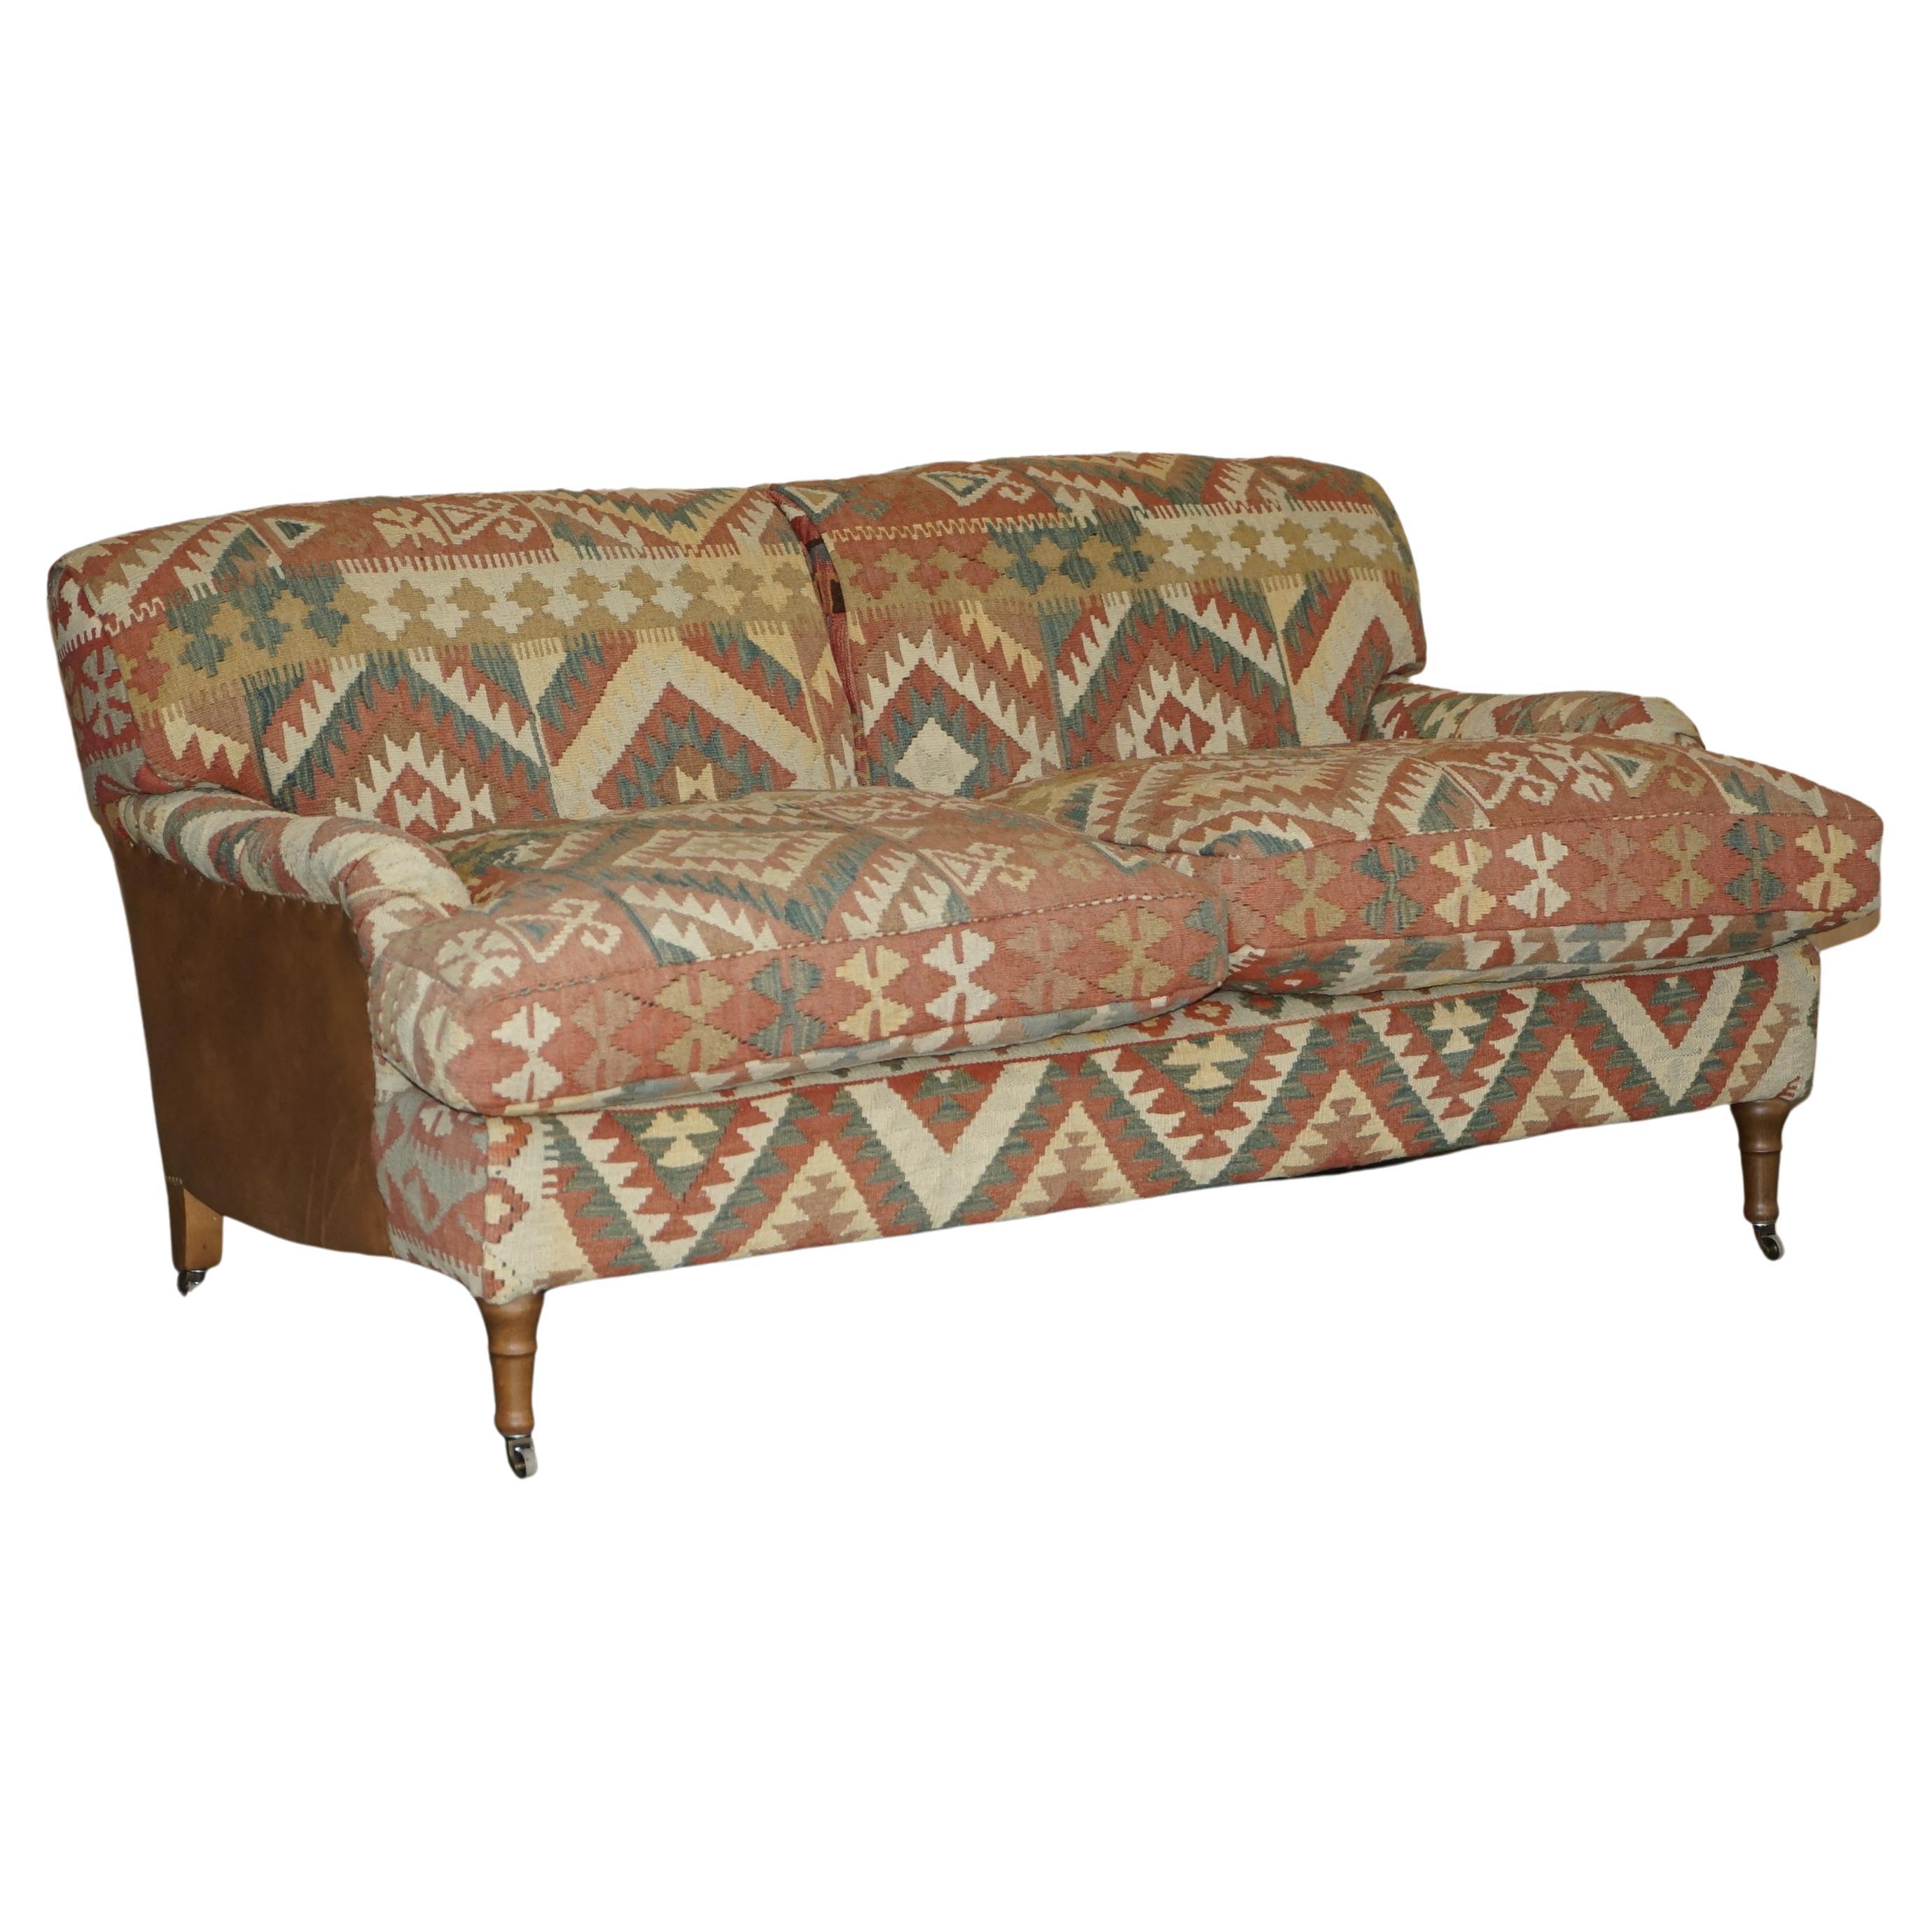 George Smith Kilim & Brown Leather Howard & Son's Two to Three Seat Sofa